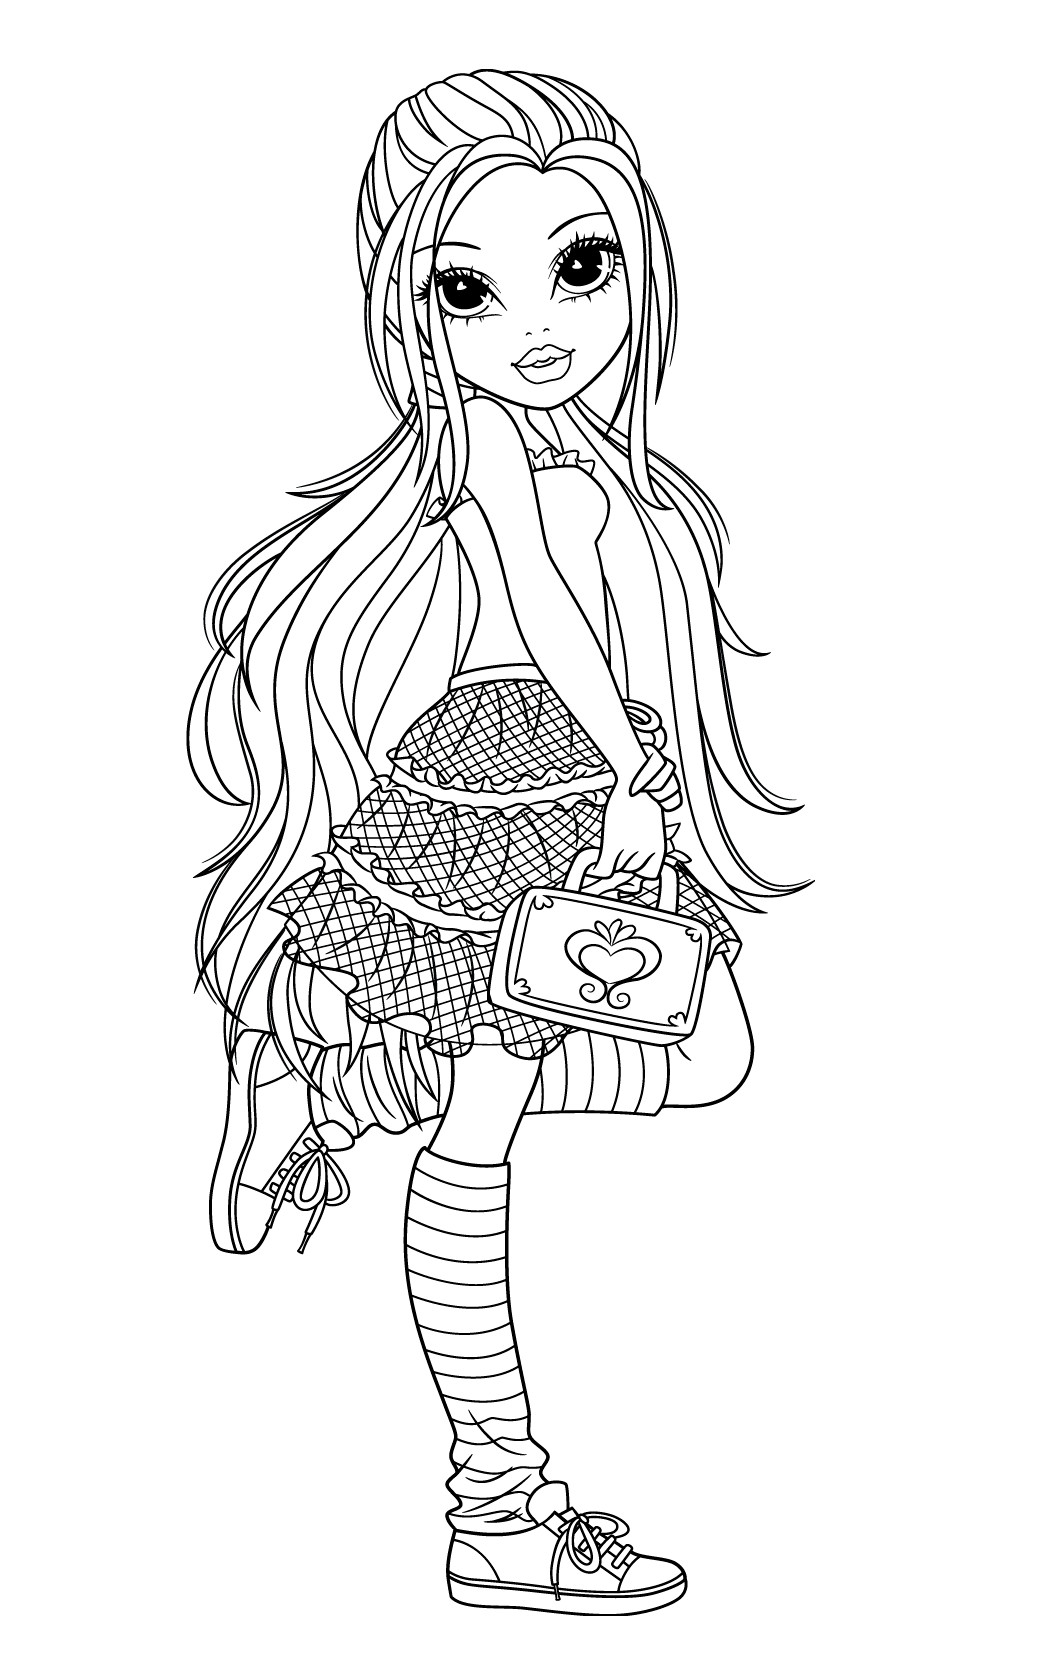 Girls Coloring Books
 New Moxie Girlz Coloring Pages will be added frequently so